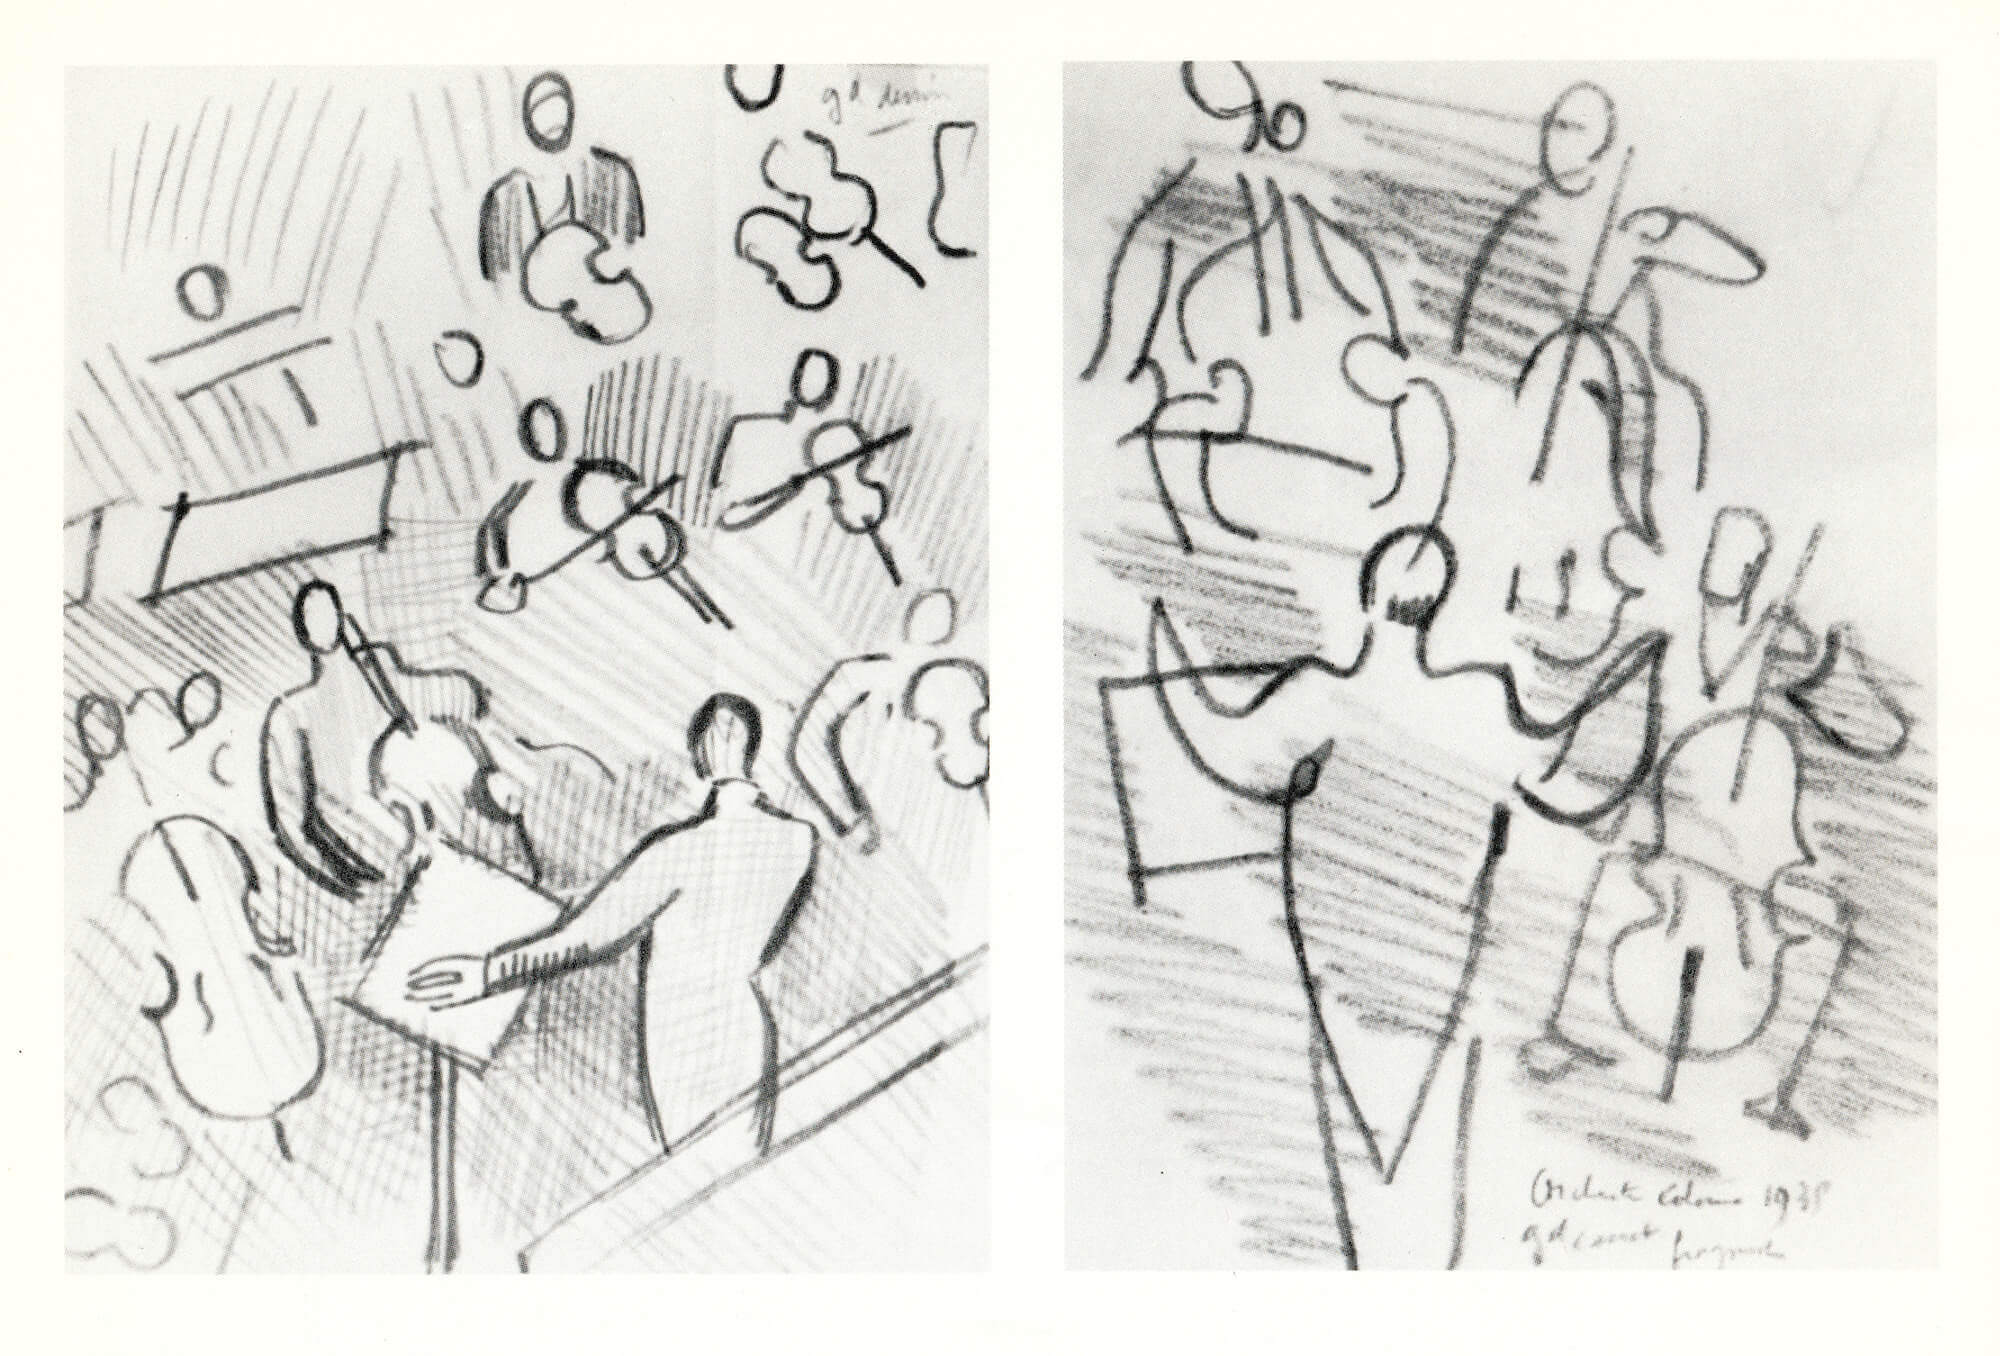 Raoul Dufy, Orchestre drawings, c. 1935, pencil